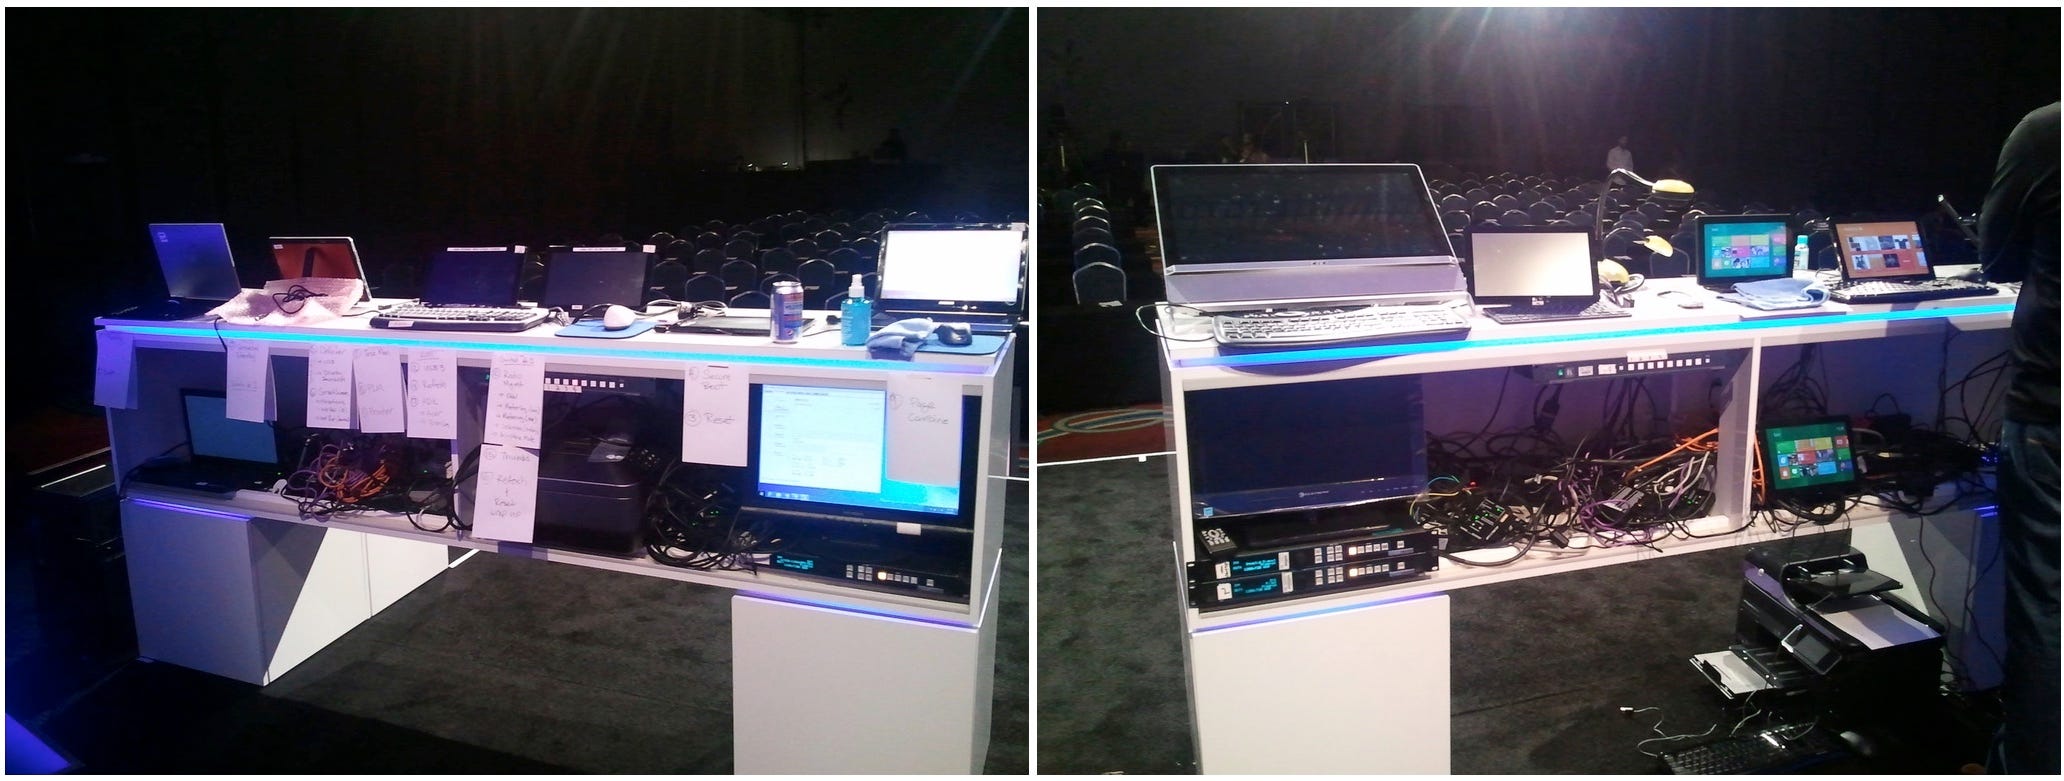 Two photos of the back view of the demo stations and all the hardware required for demos.